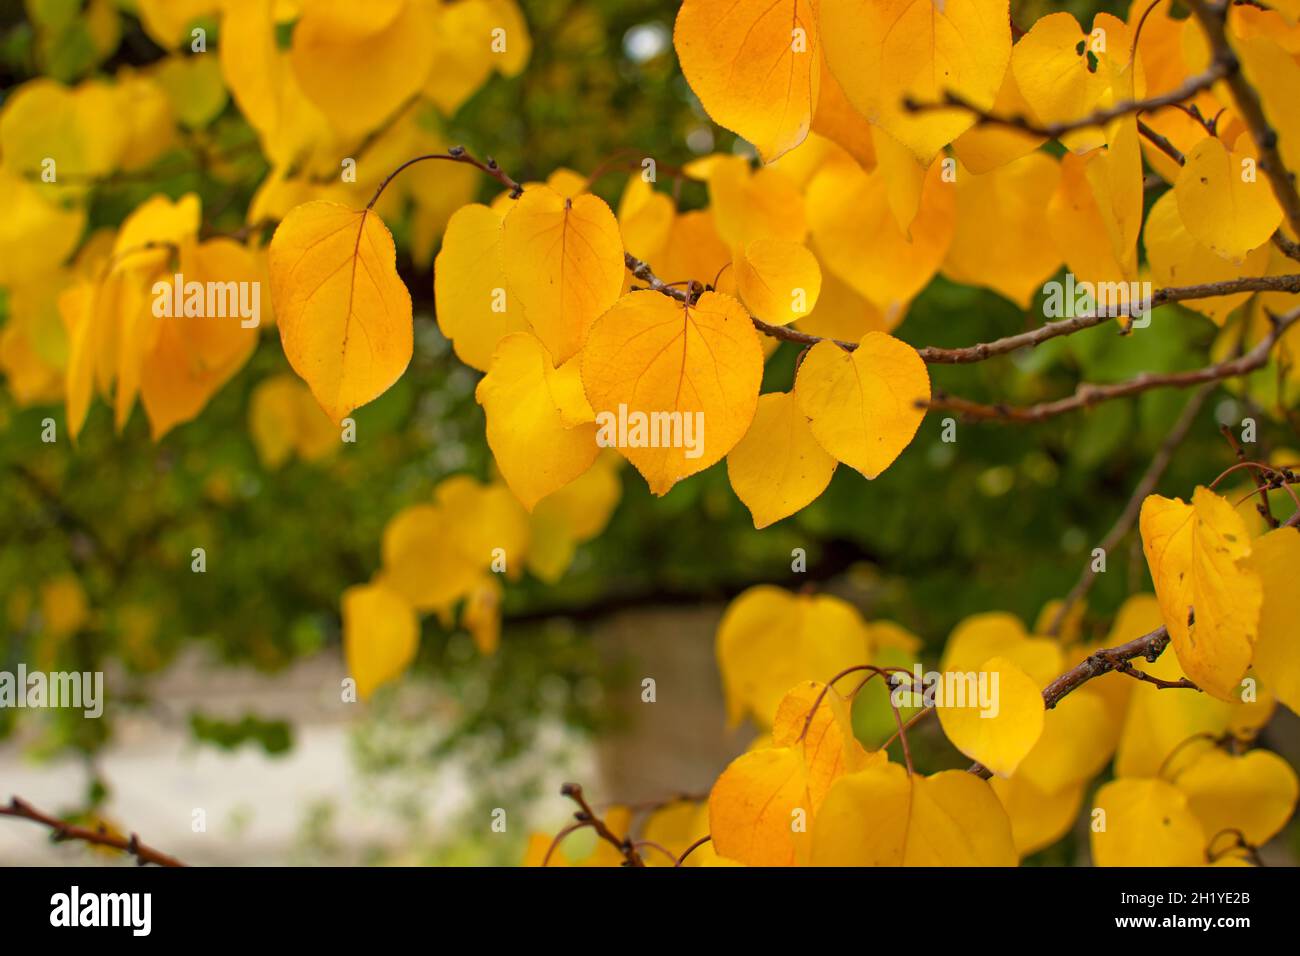 Autumn leaves in the sun. Fall blurred background. Stock Photo